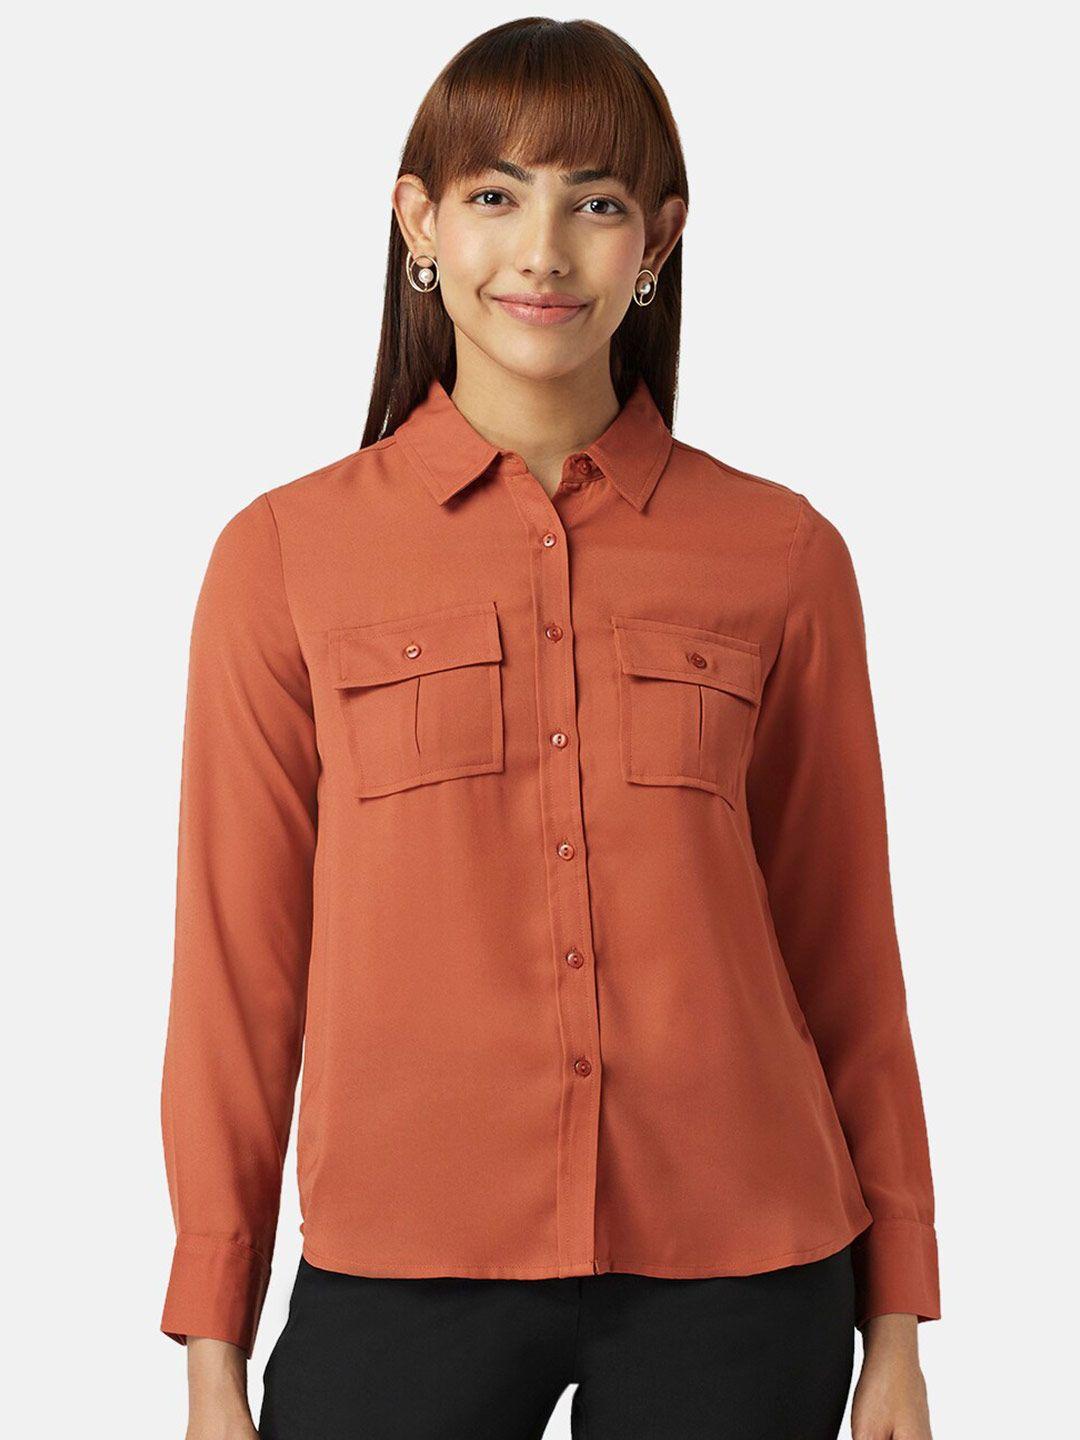 annabelle by pantaloons women casual shirt